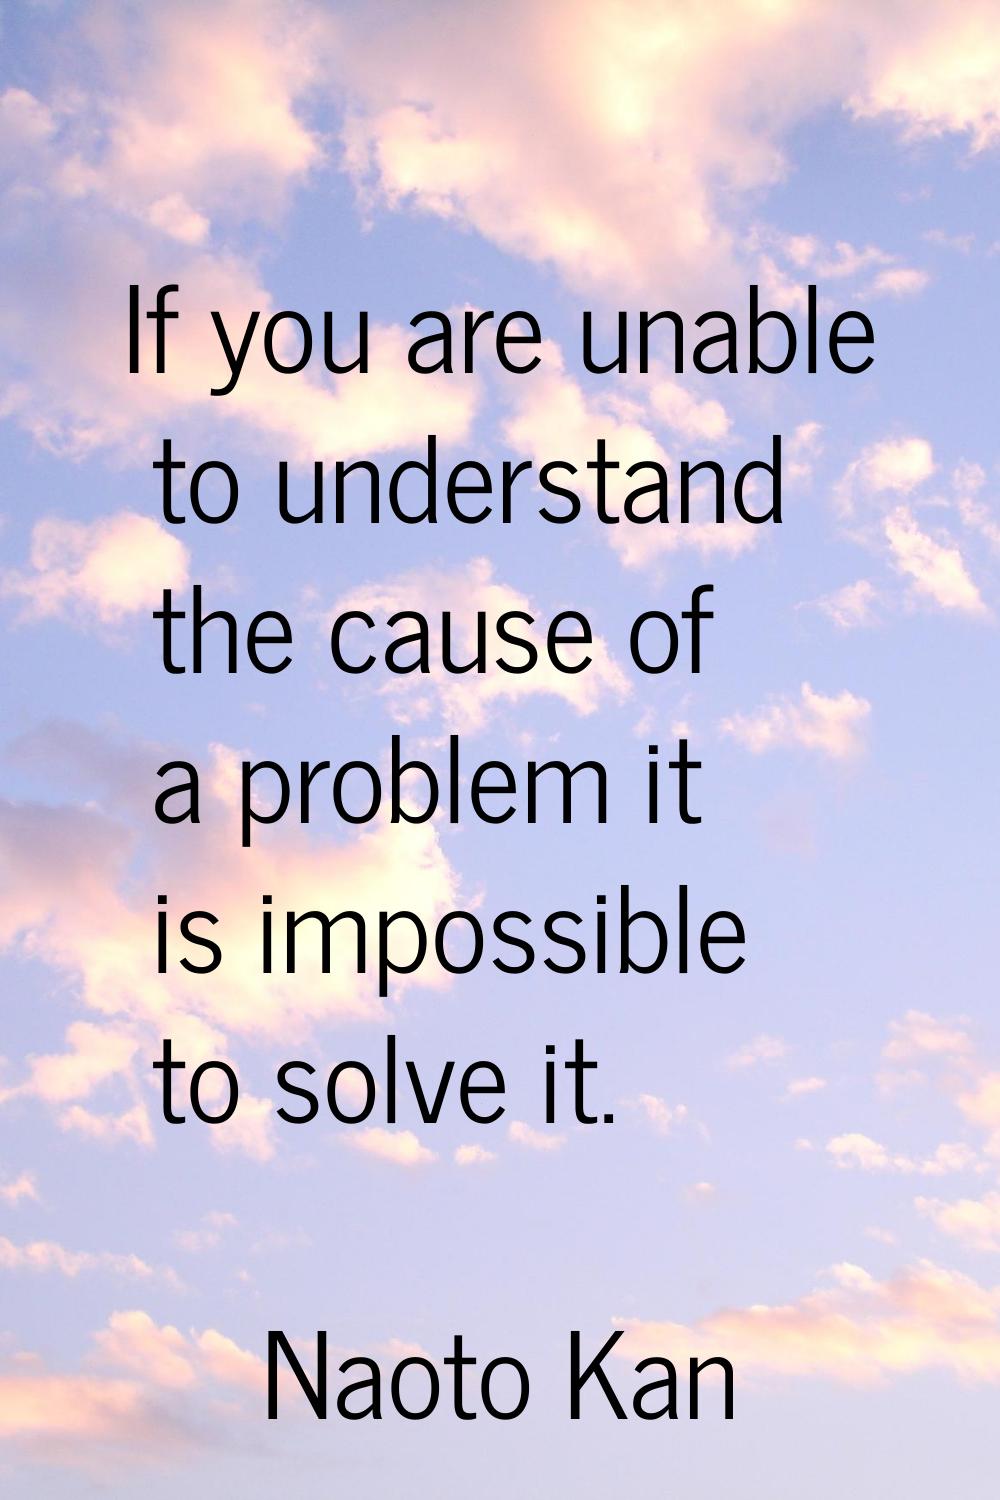 If you are unable to understand the cause of a problem it is impossible to solve it.